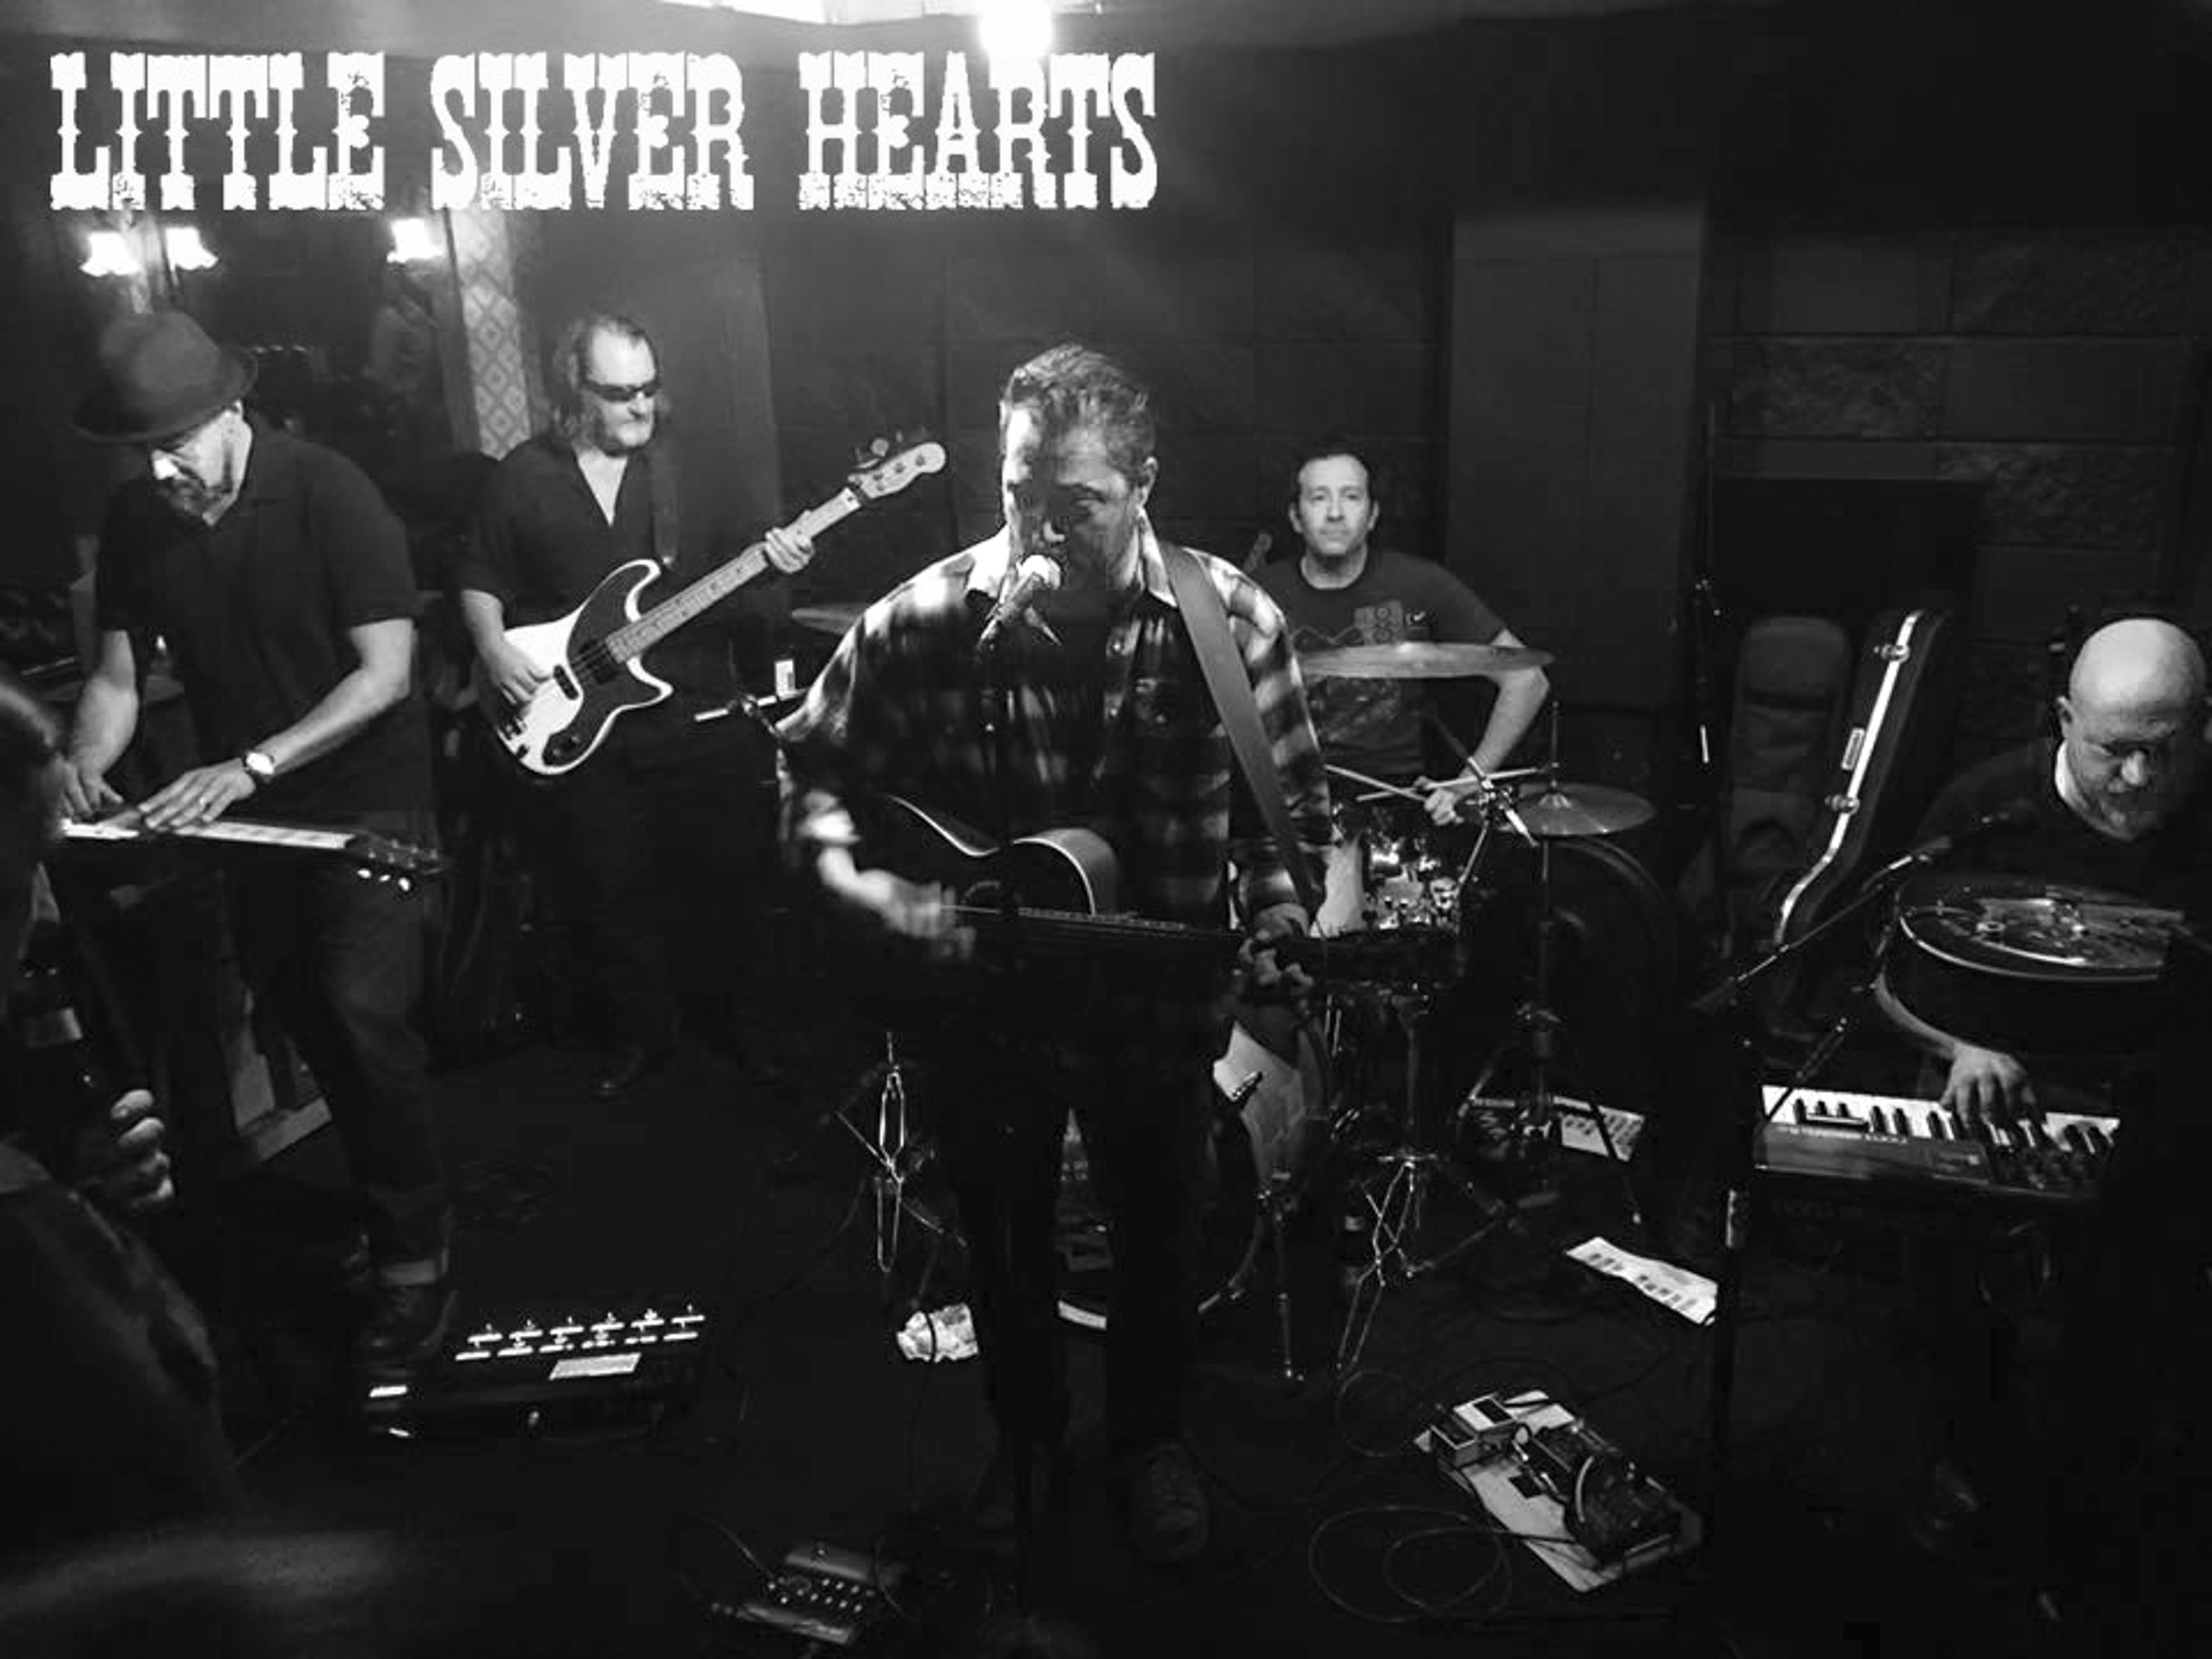 Thumbnail for South Pasadena’s homegrown ‘Little Silver Hearts’